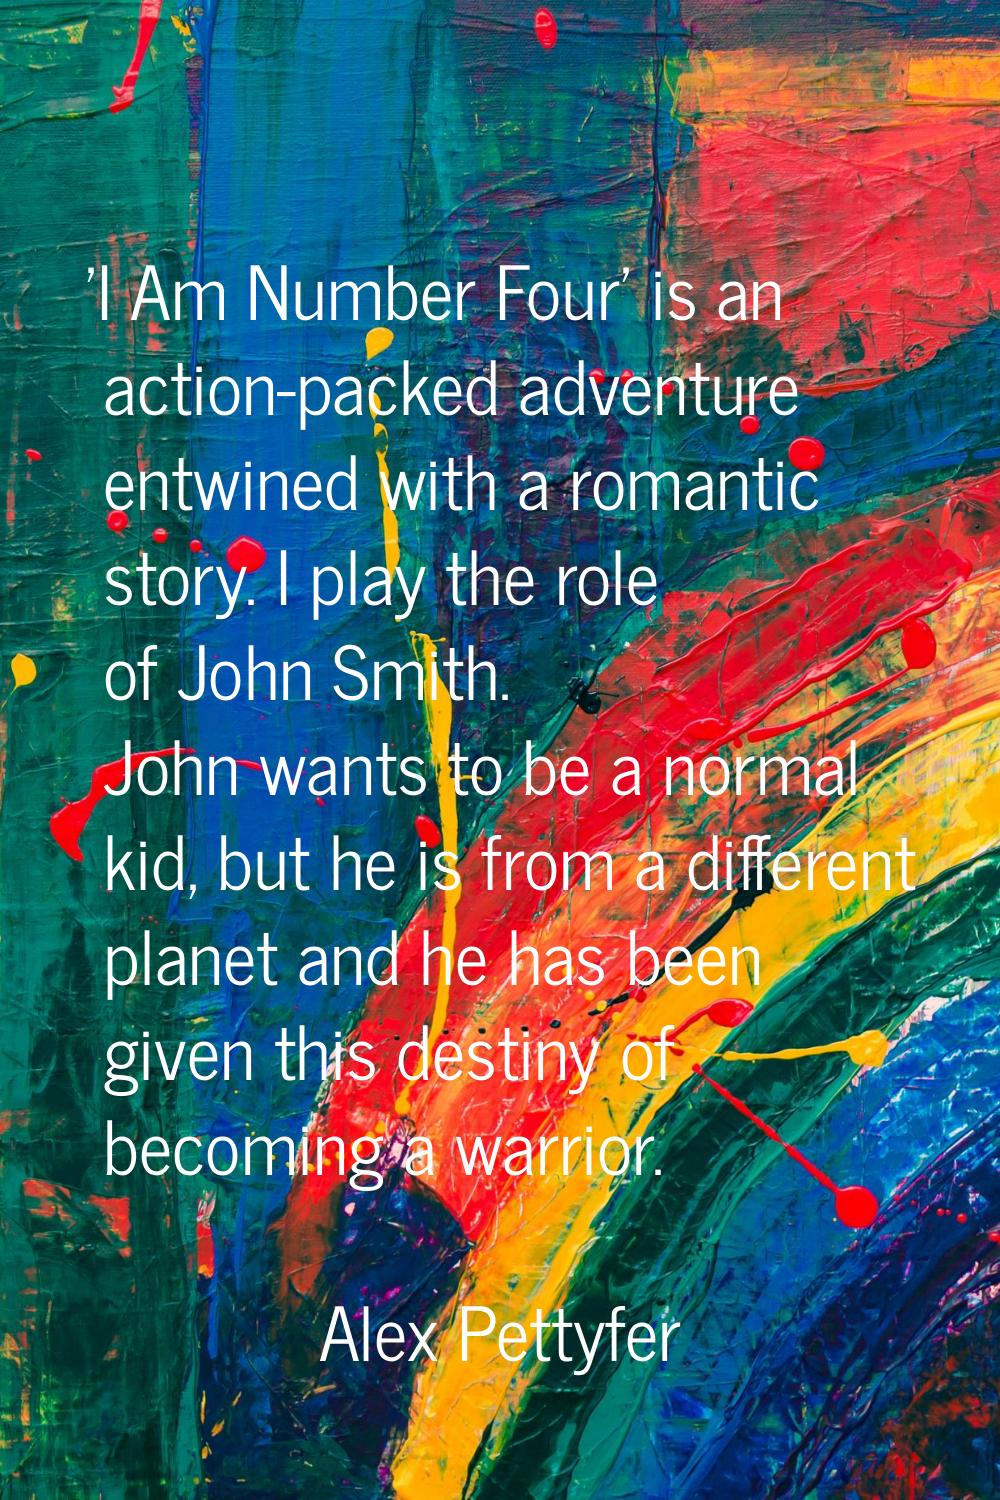 'I Am Number Four' is an action-packed adventure entwined with a romantic story. I play the role of